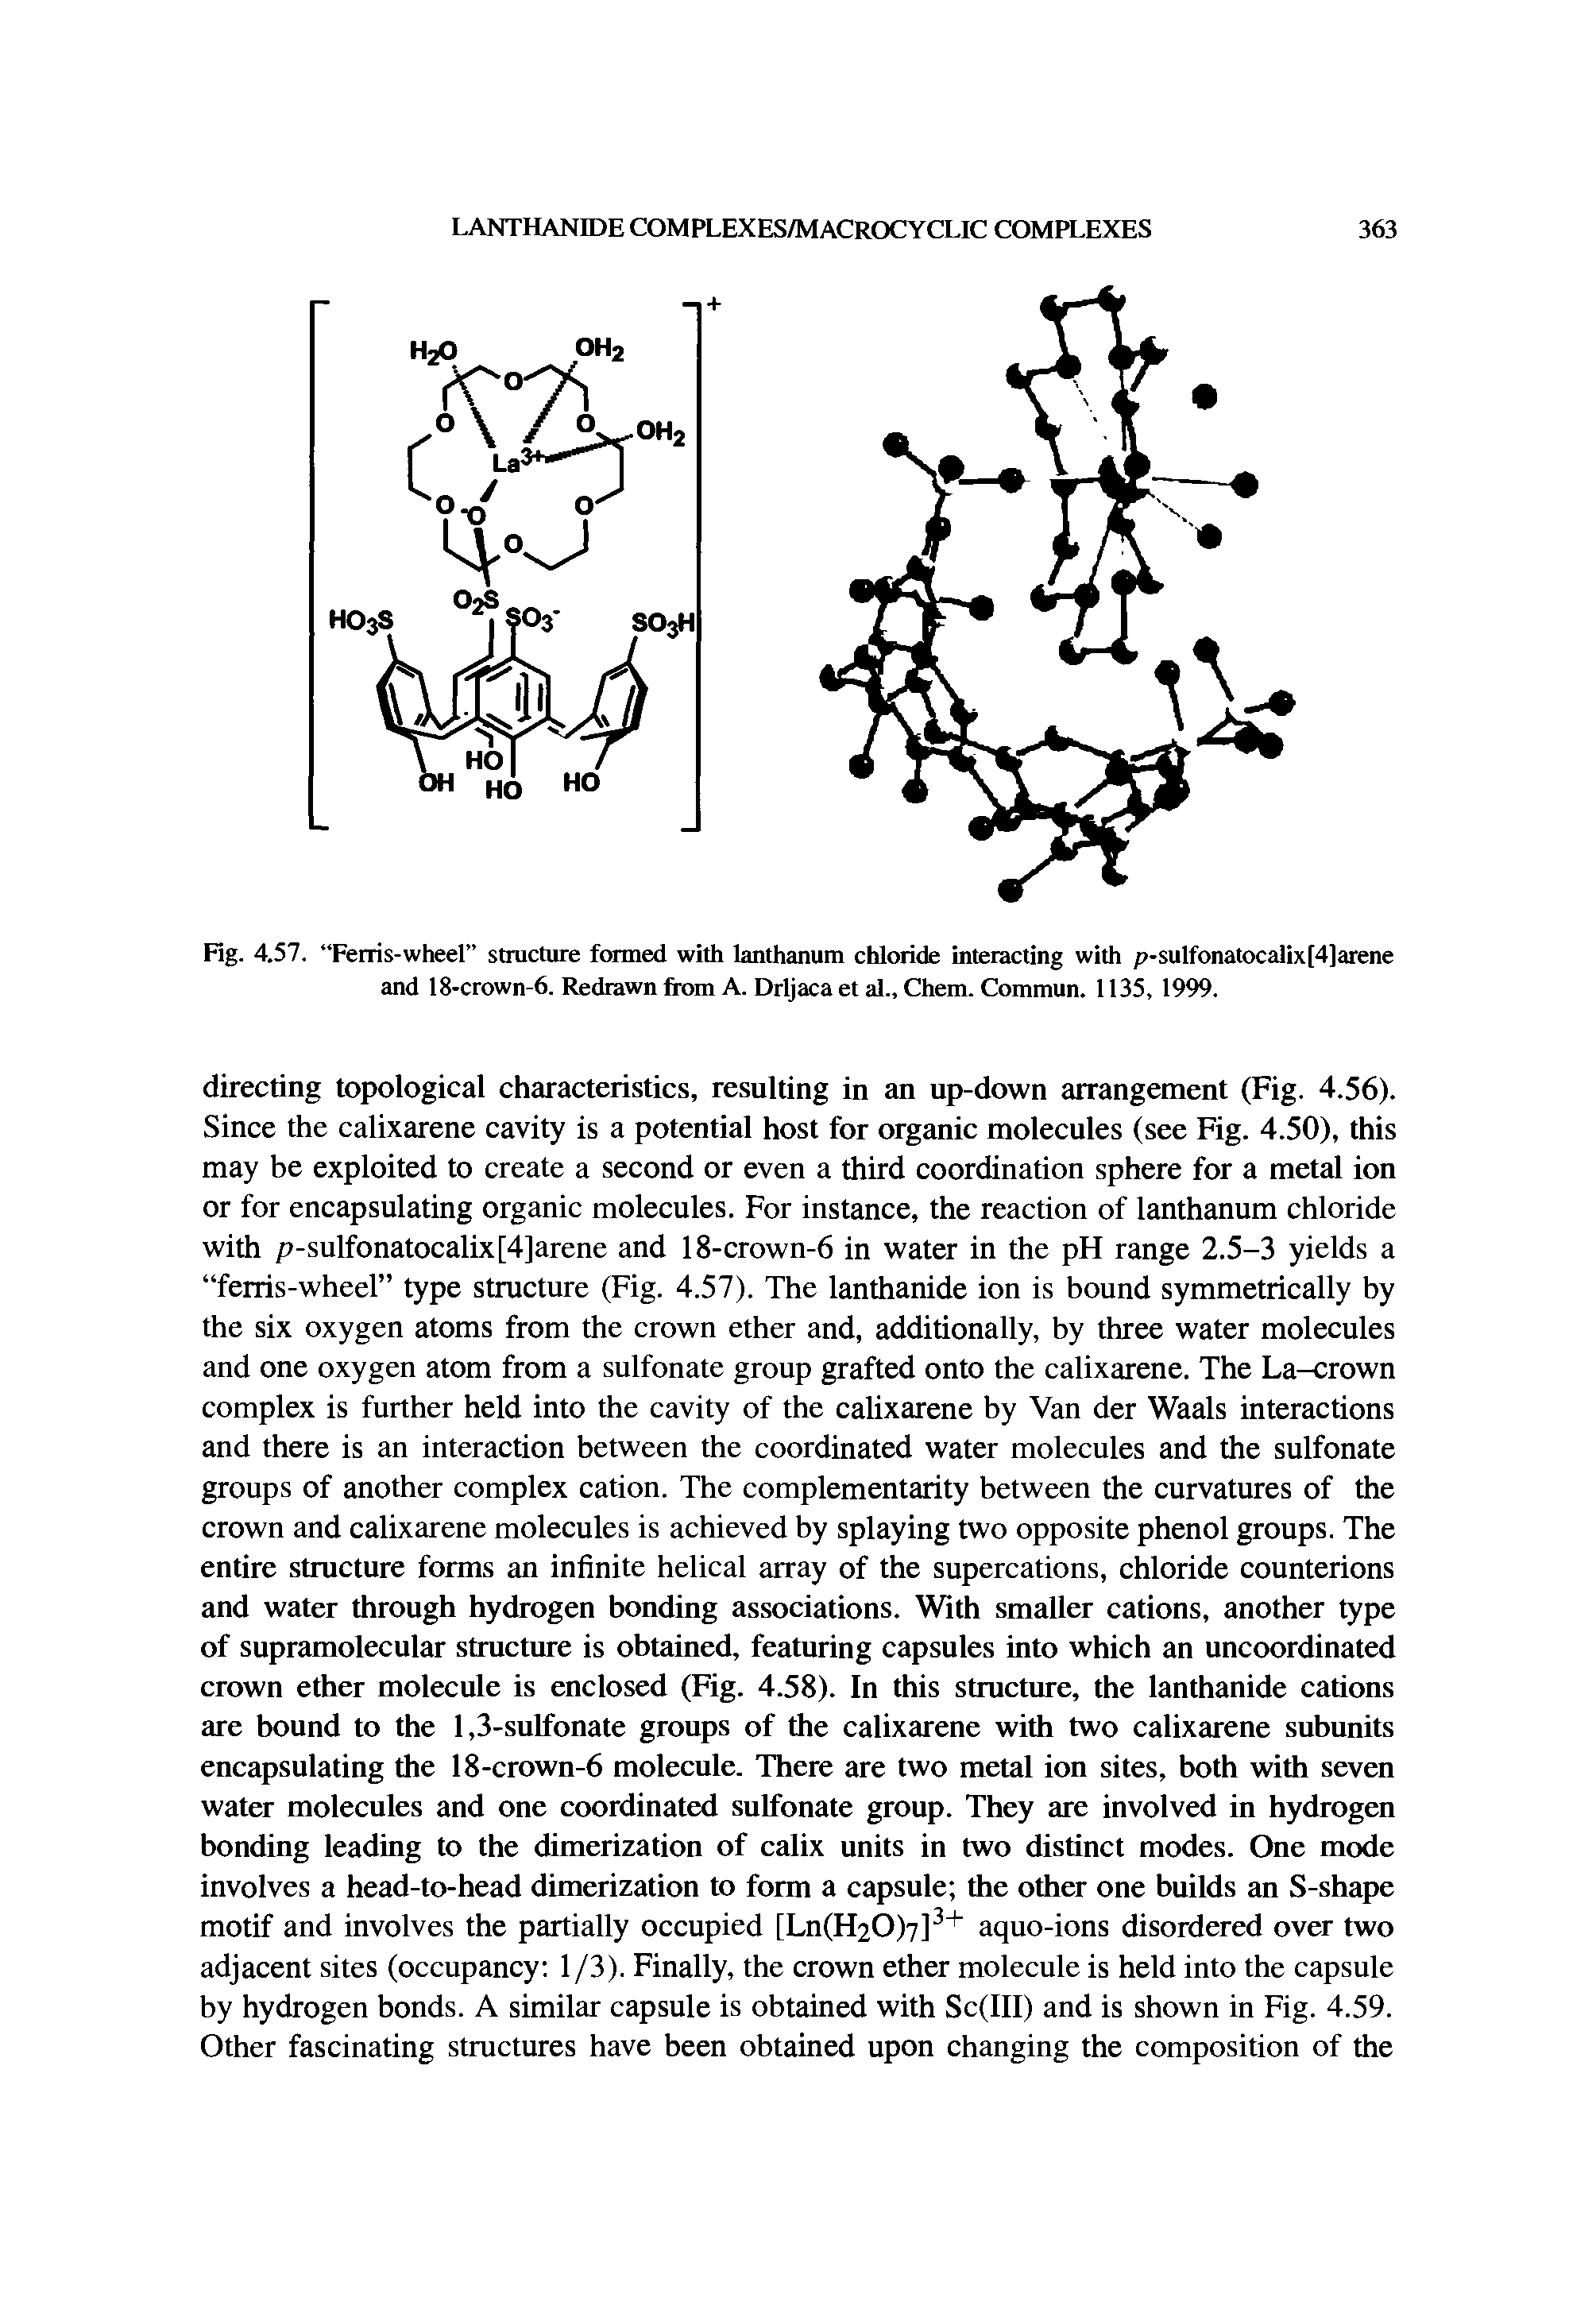 Fig. 4.57. Ferris-wheel structure formed with lanthanum chloride interacting with p-sulfonatocalix[4]arene and 18-crown-6. Redrawn from A. Drljaca et al., Chem. Commun. 1135, 1999.